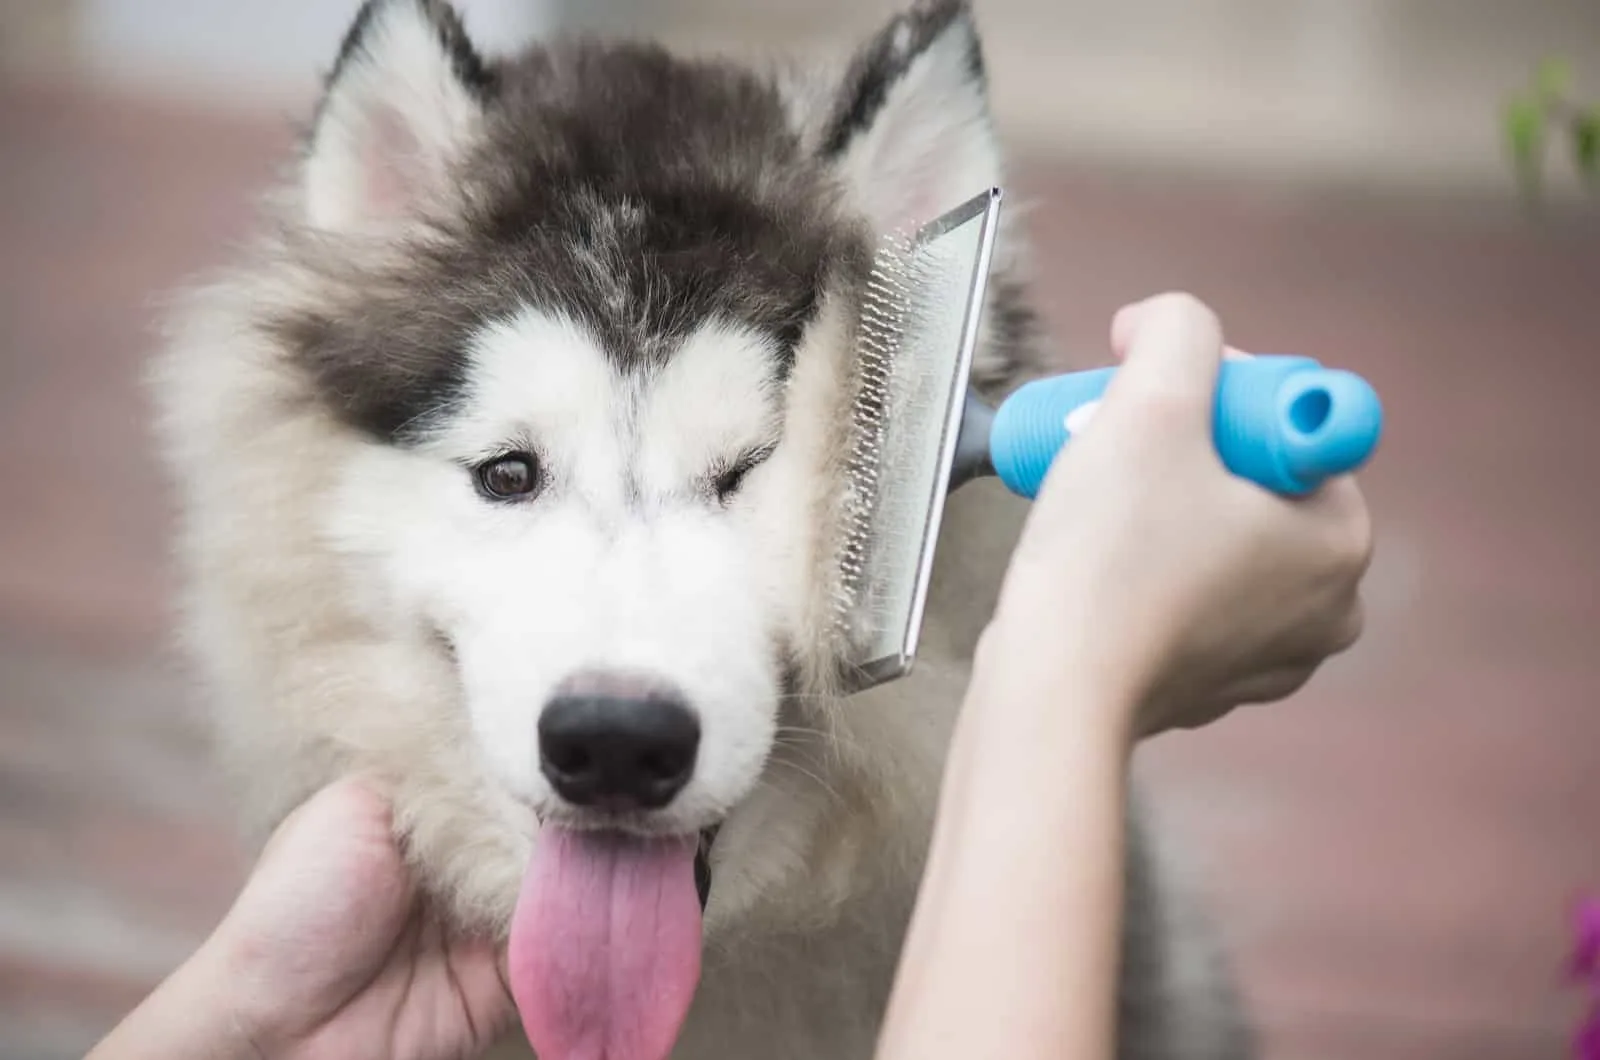 husky being brushed with a dog brush